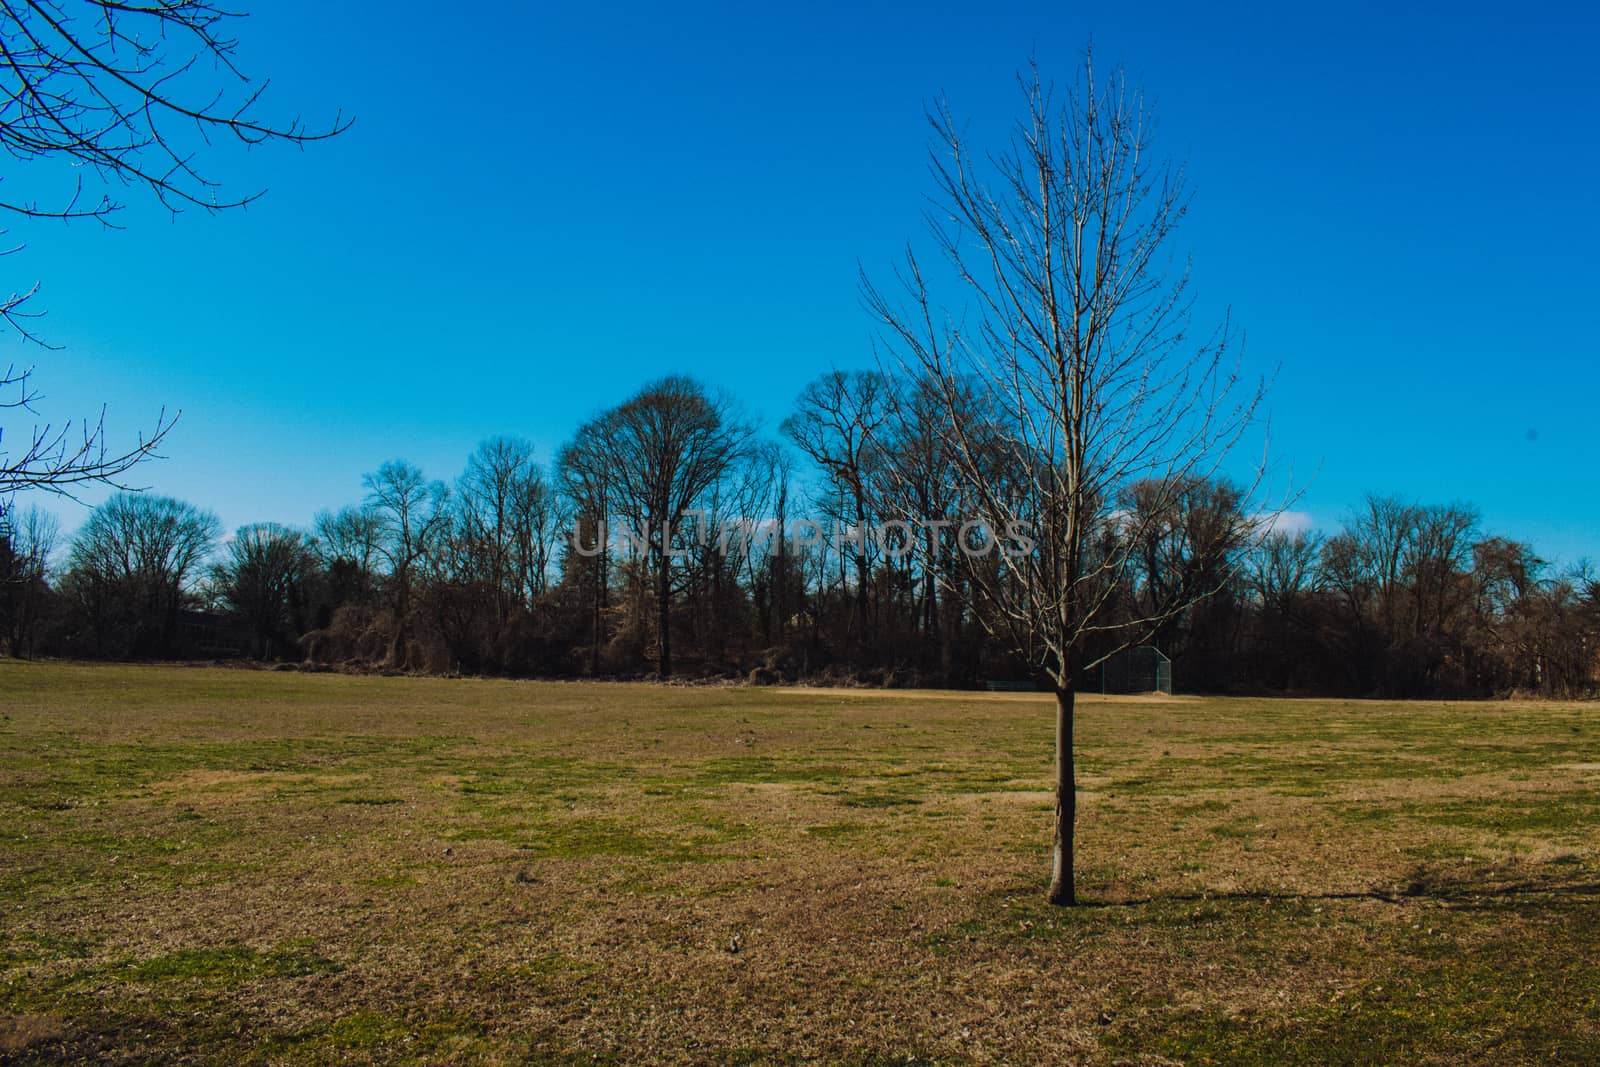 A Lone Tree In a Large Field With a Group of Trees Behind It by bju12290